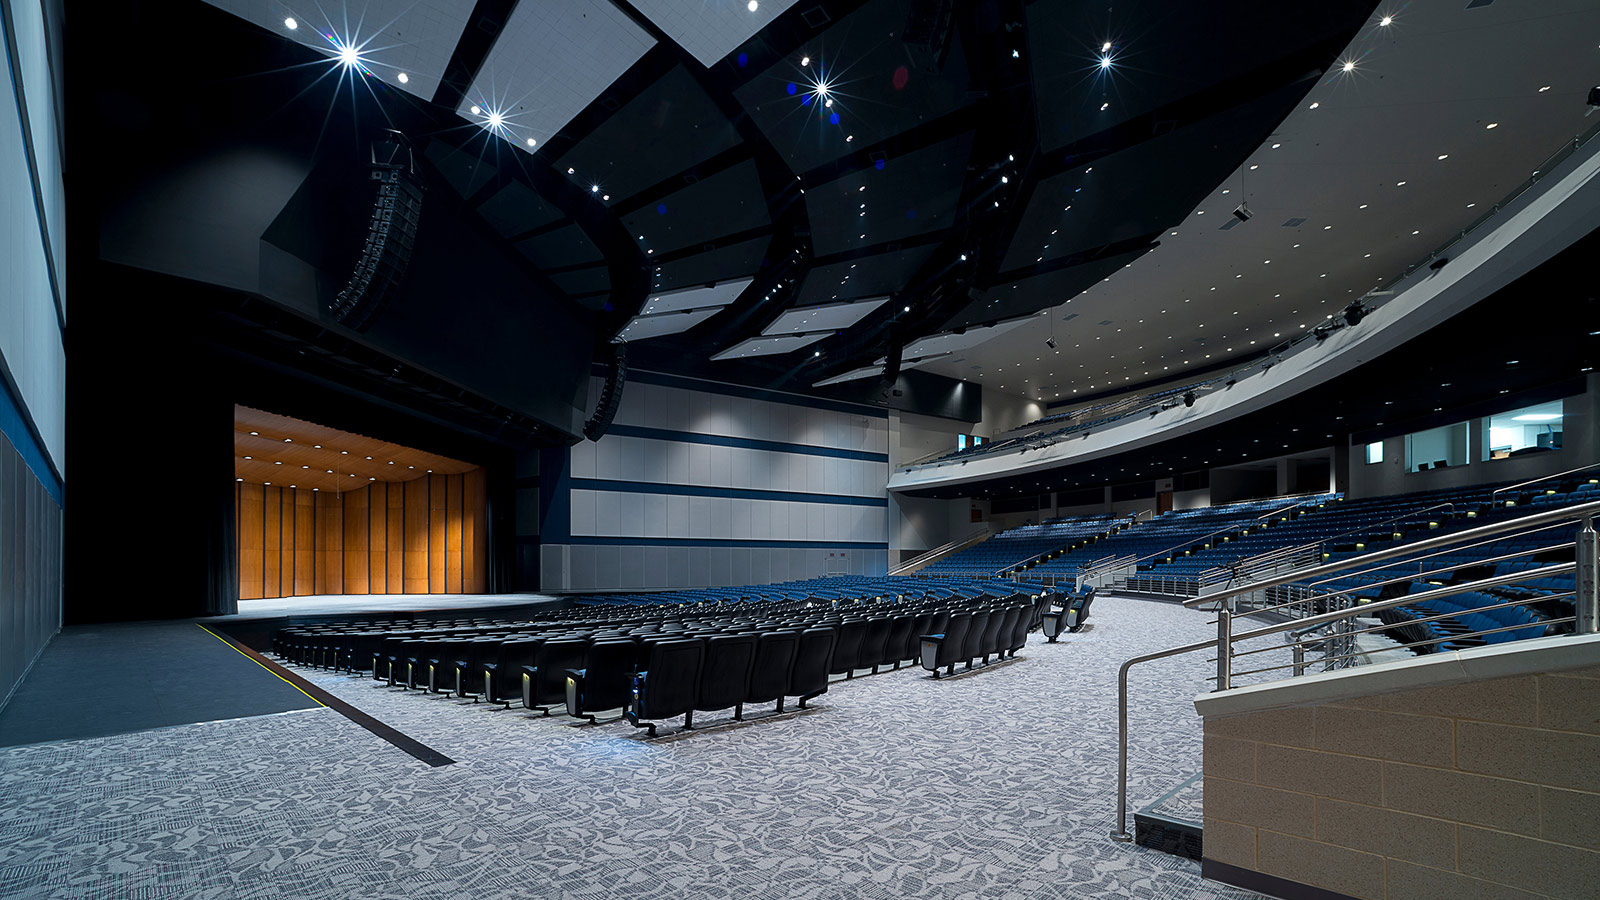 With Meyer Sound Constellation, Mansfield Performing Arts Center Combines Several Halls into One